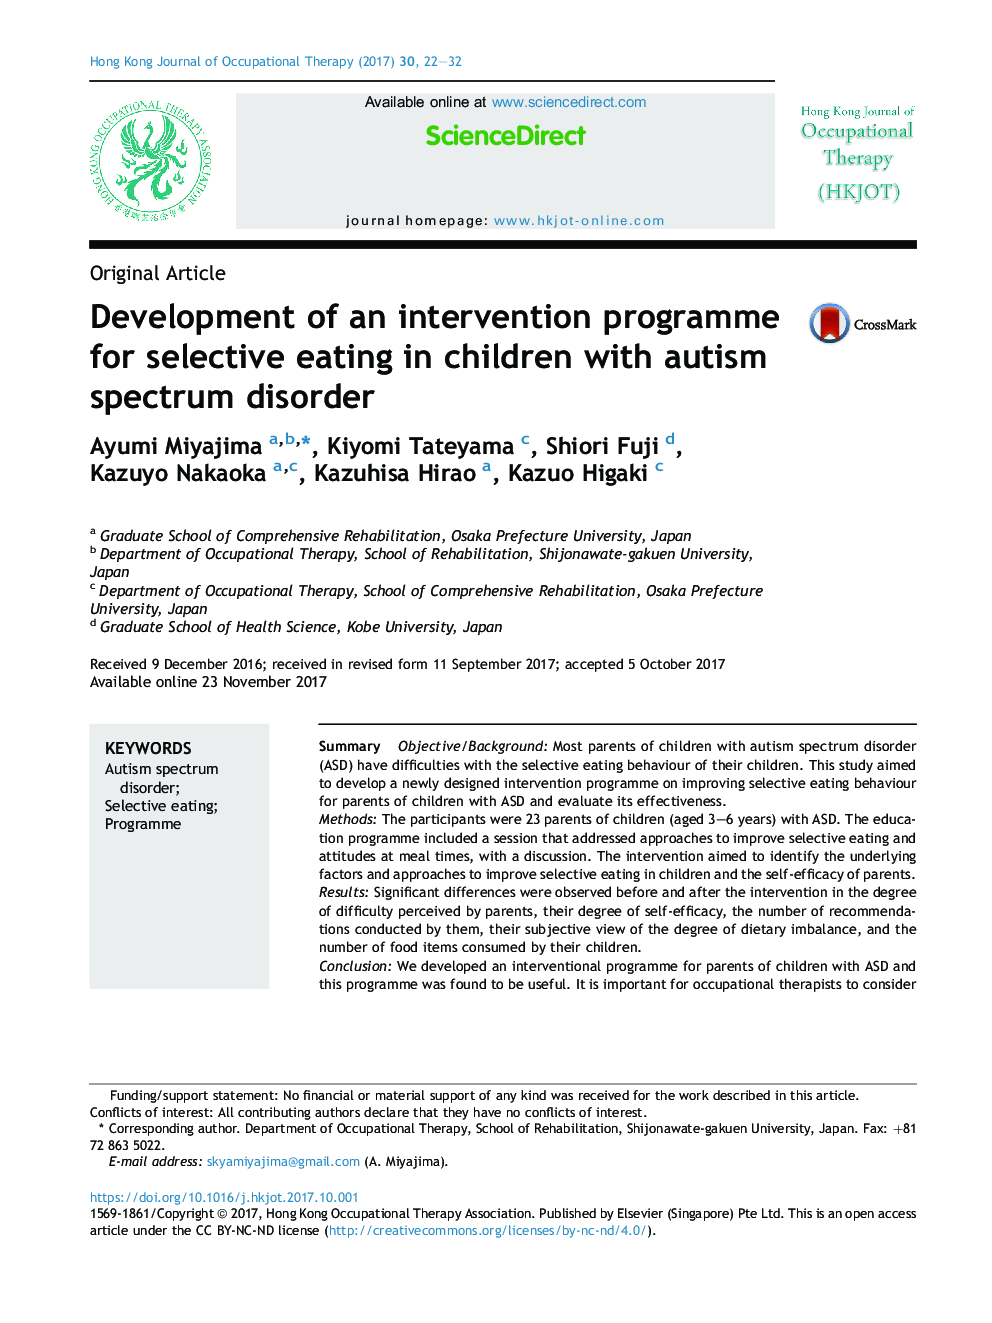 Development of an intervention programme for selective eating in children with autism spectrum disorder